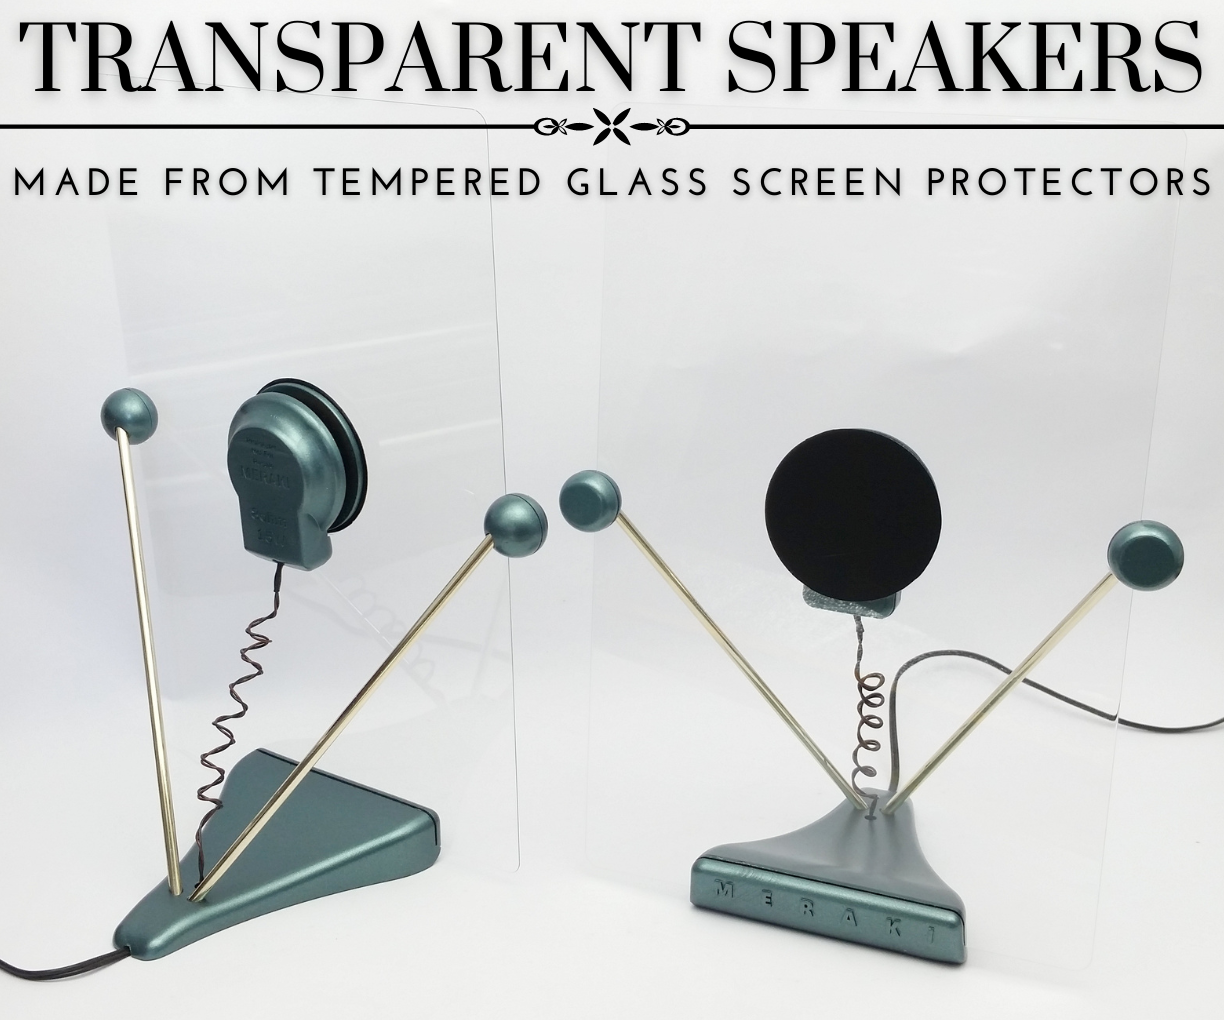 Transparent DML Speakers Made With Some Unconventional Materials!